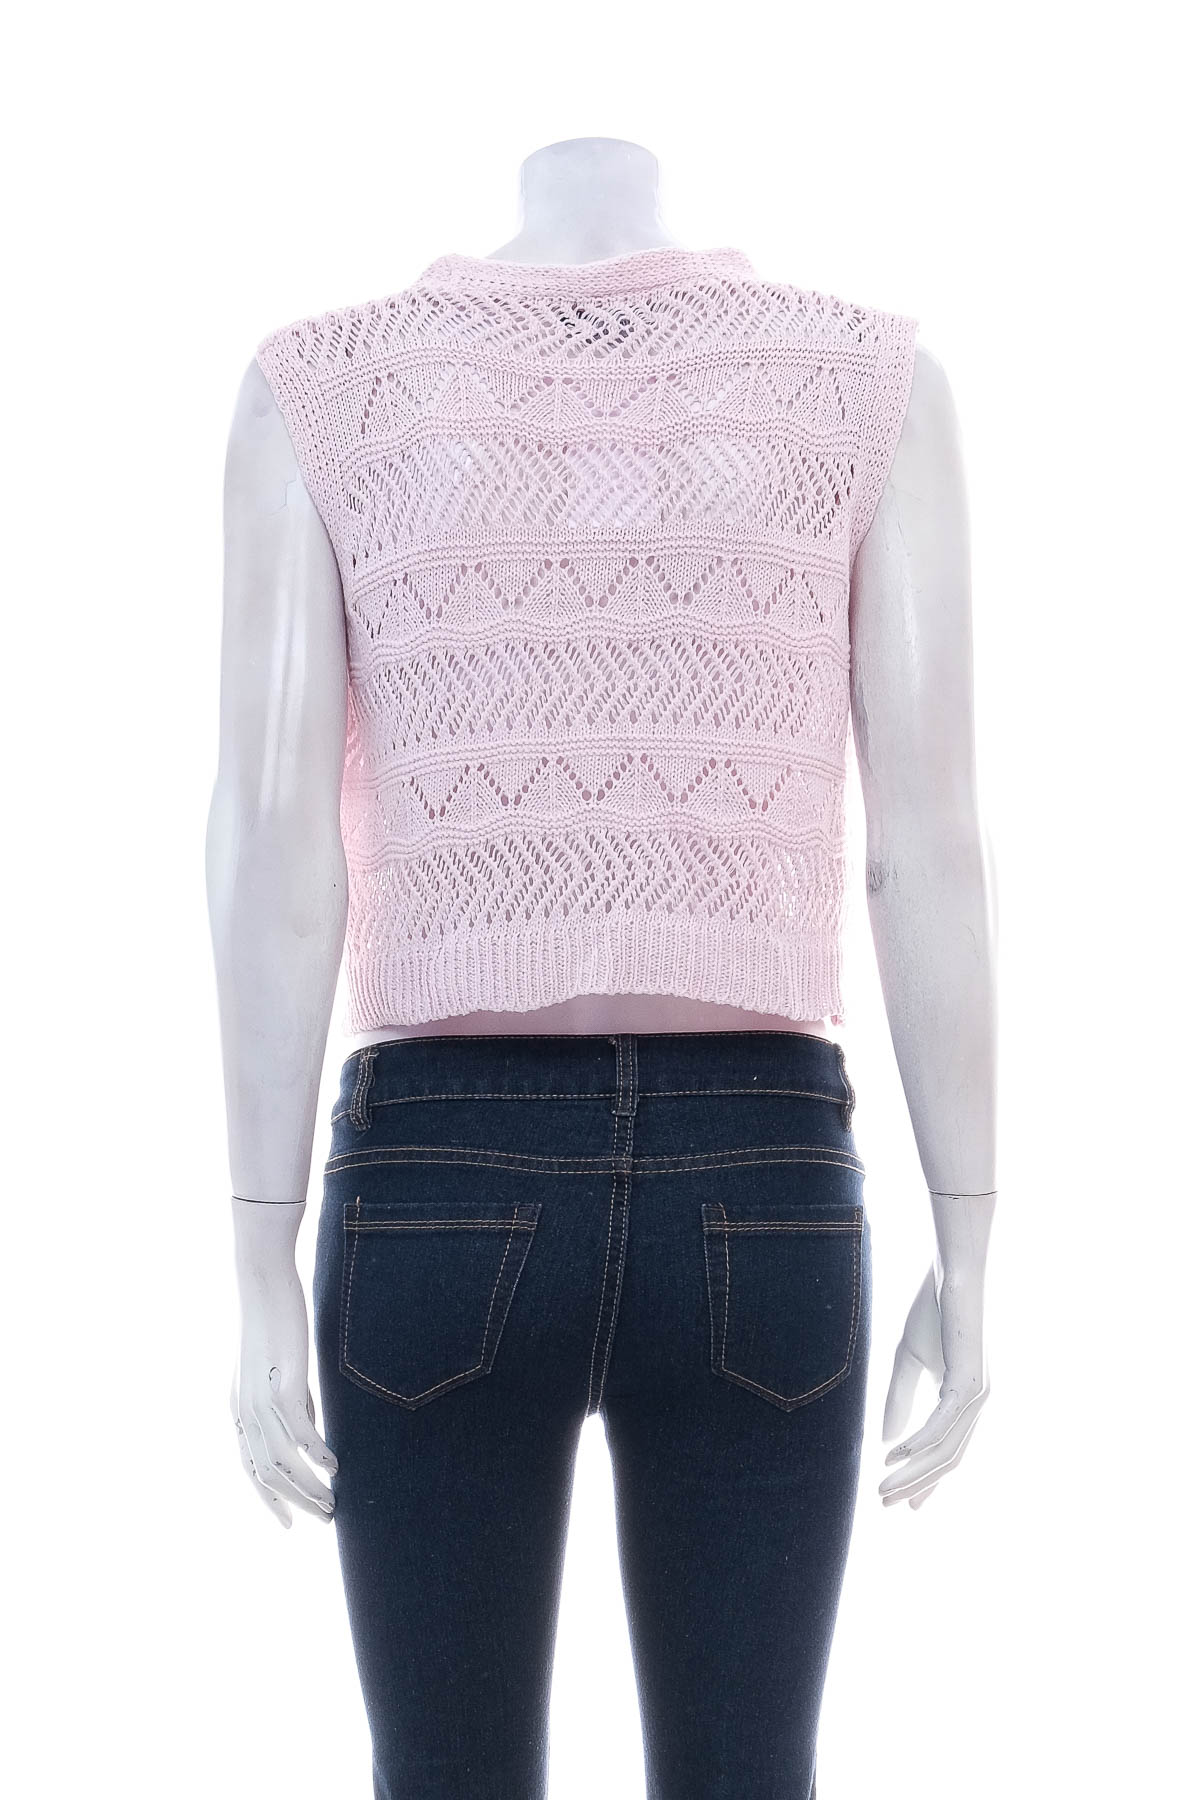 Women's sweater - SUBLEVEL - 1